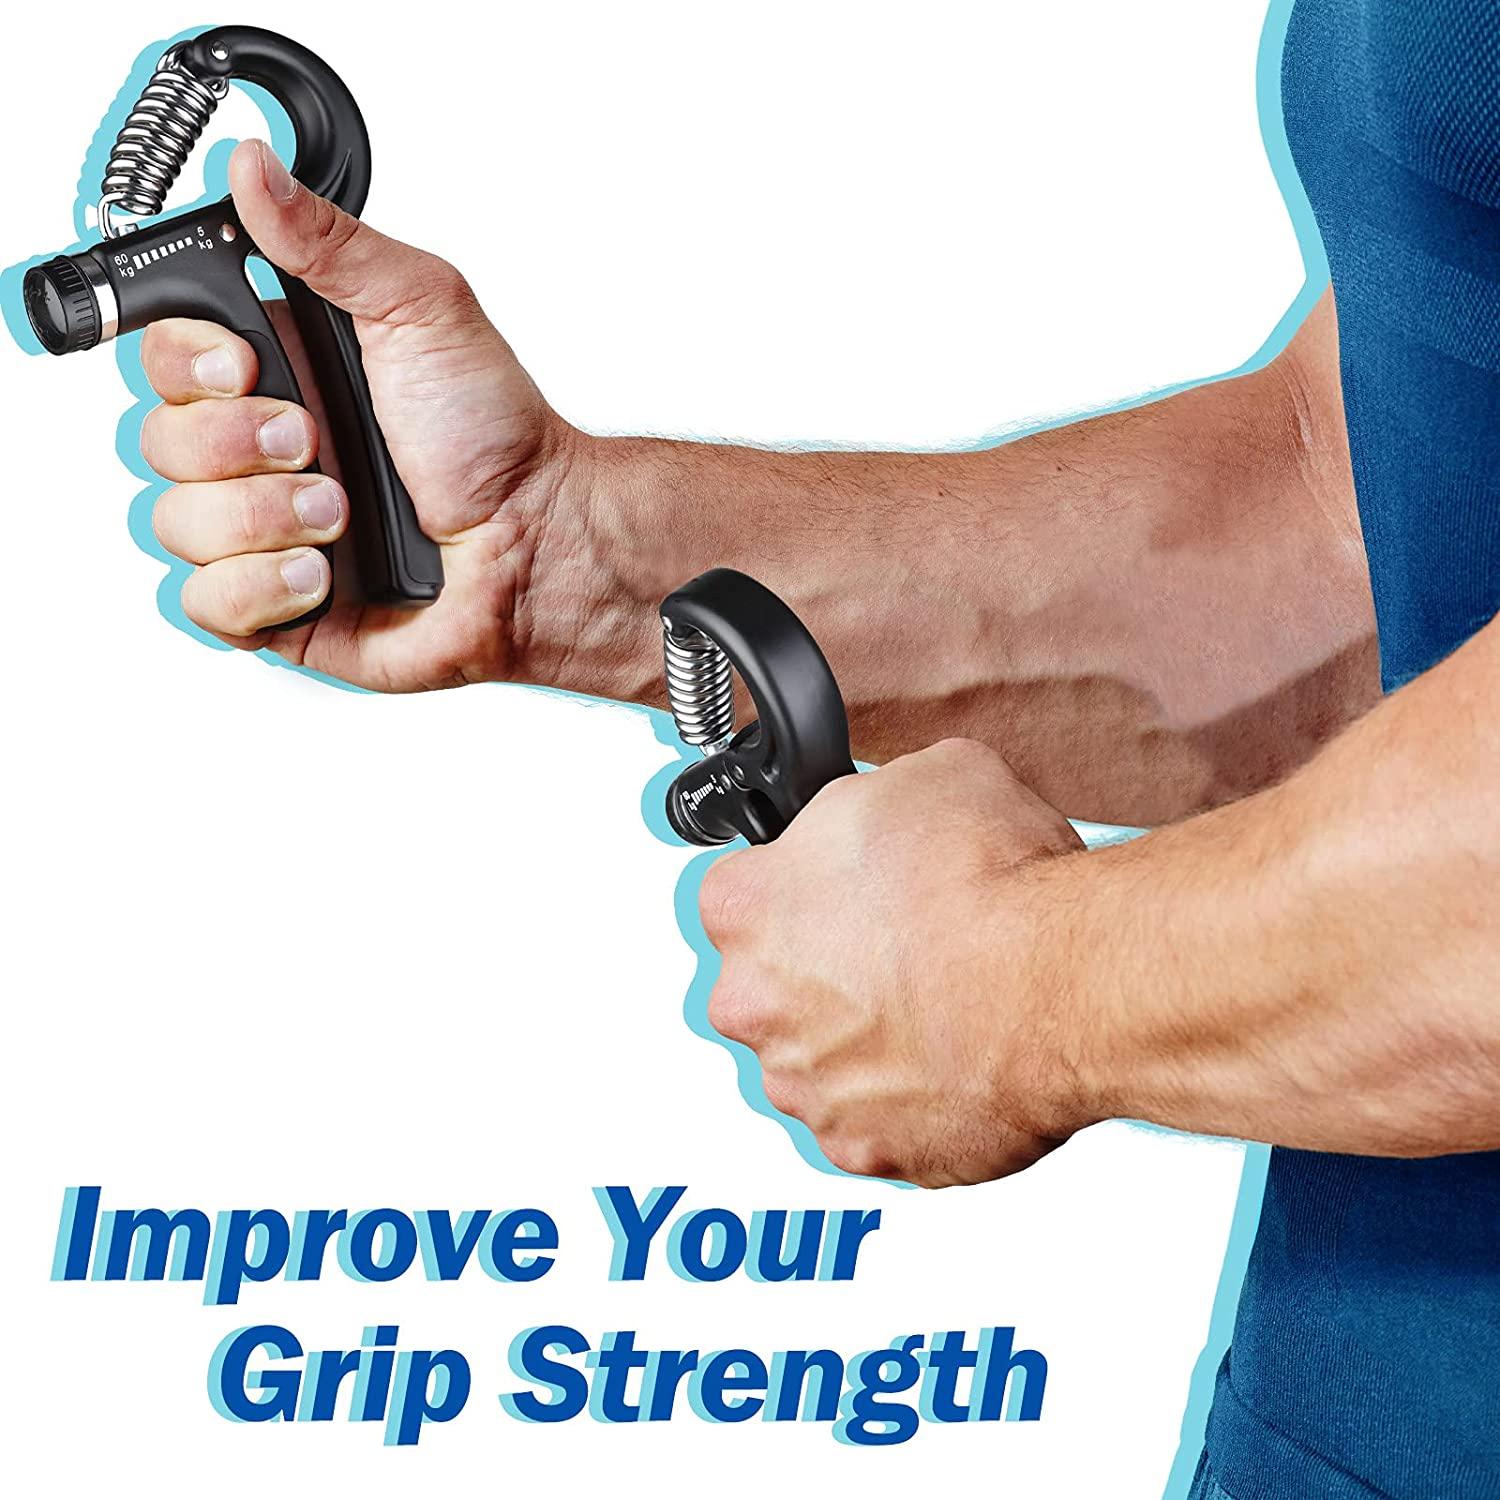 AIXPI Grip Strength Trainer, Hand Grip Exerciser Strengthener with  Adjustable Resistance 11-132 Lbs (5-60kg), Forearm Strengthener, Hand  Exerciser for Muscle Building and Injury Recover black-2pack